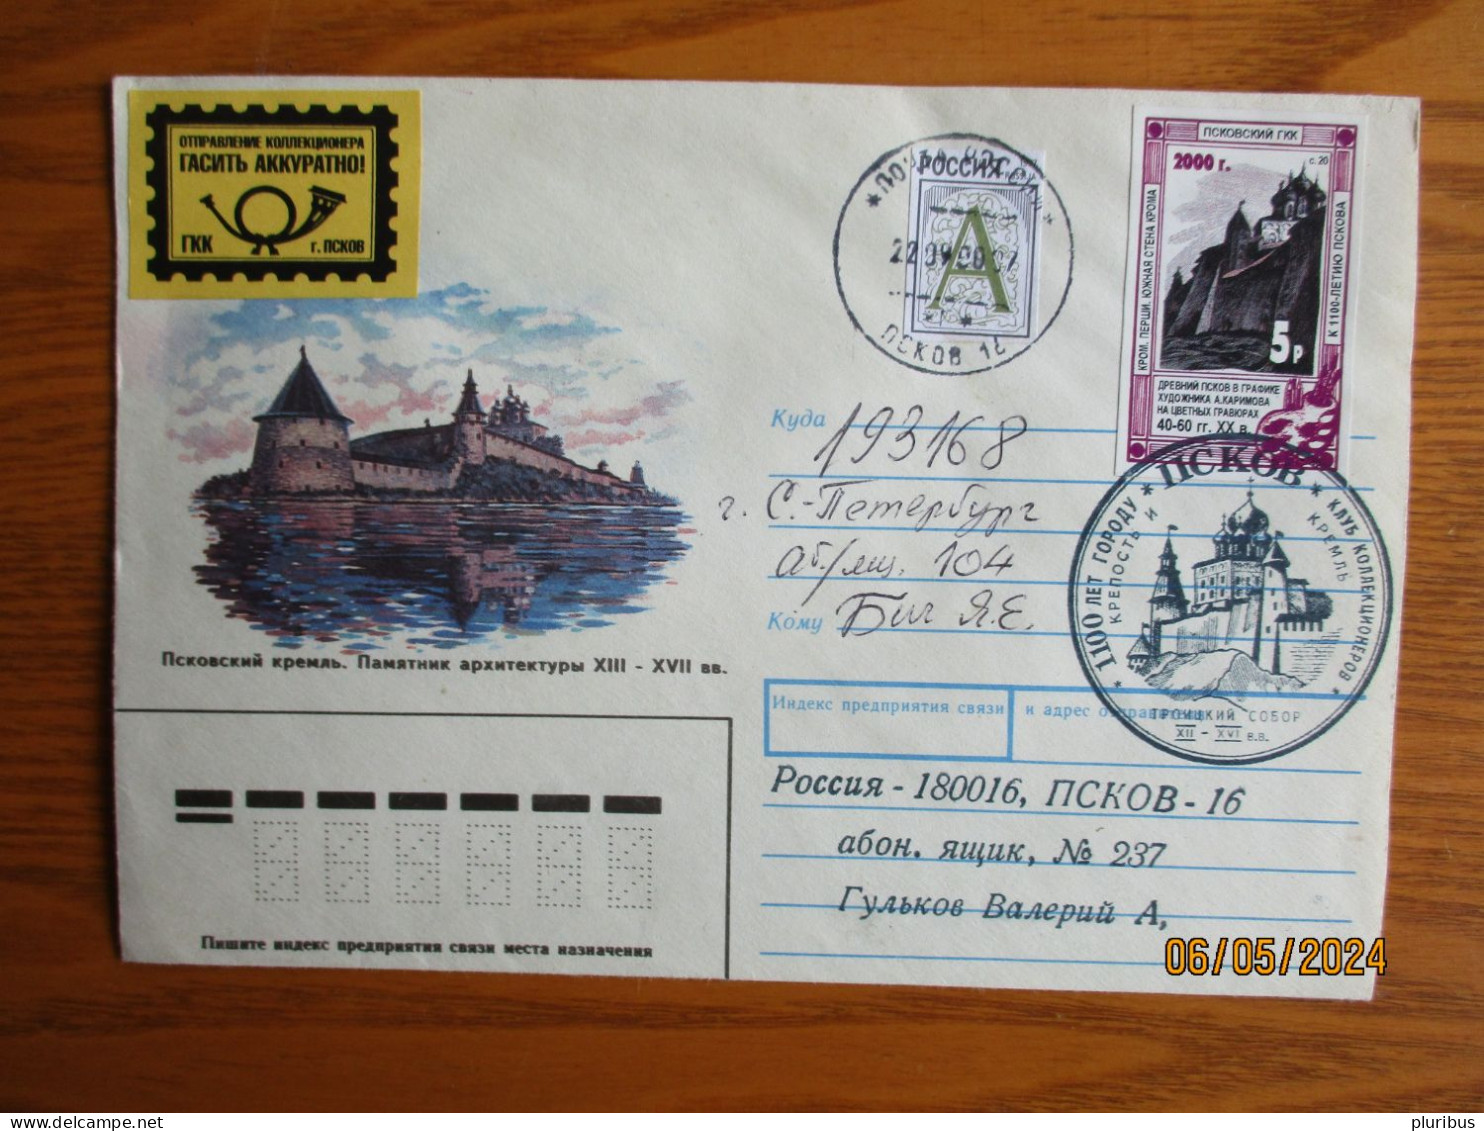 RUSSIA 2000 PSKOV TO PETERSBURG , COVER WITH TWO LABEL CINDERELLA VIGNETTE , 1-41 - Covers & Documents